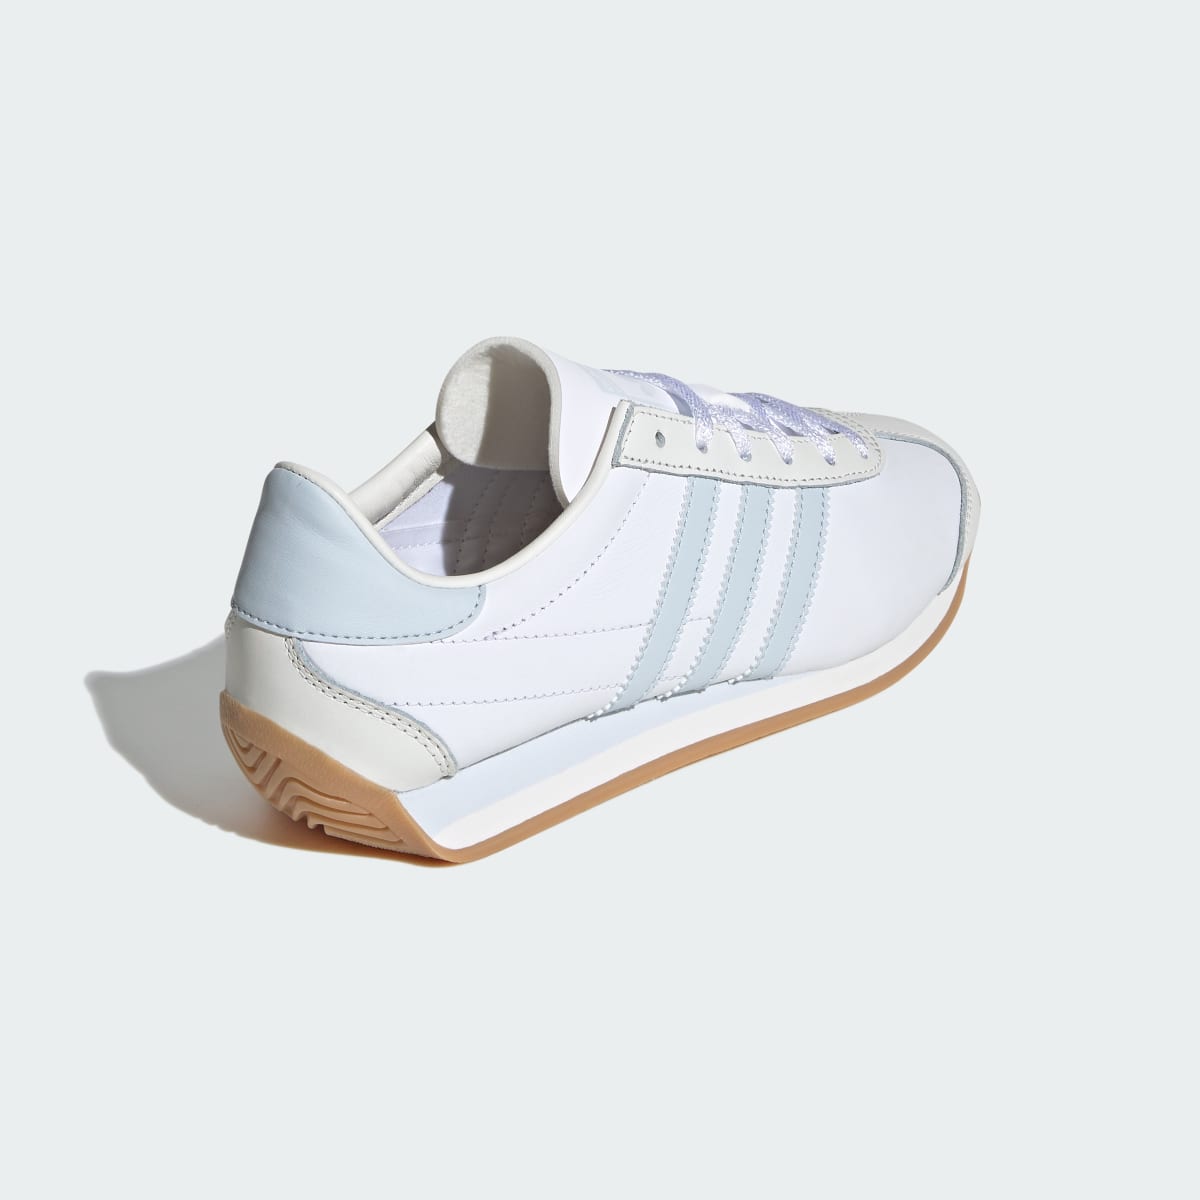 Adidas Country OG Shoes. 6